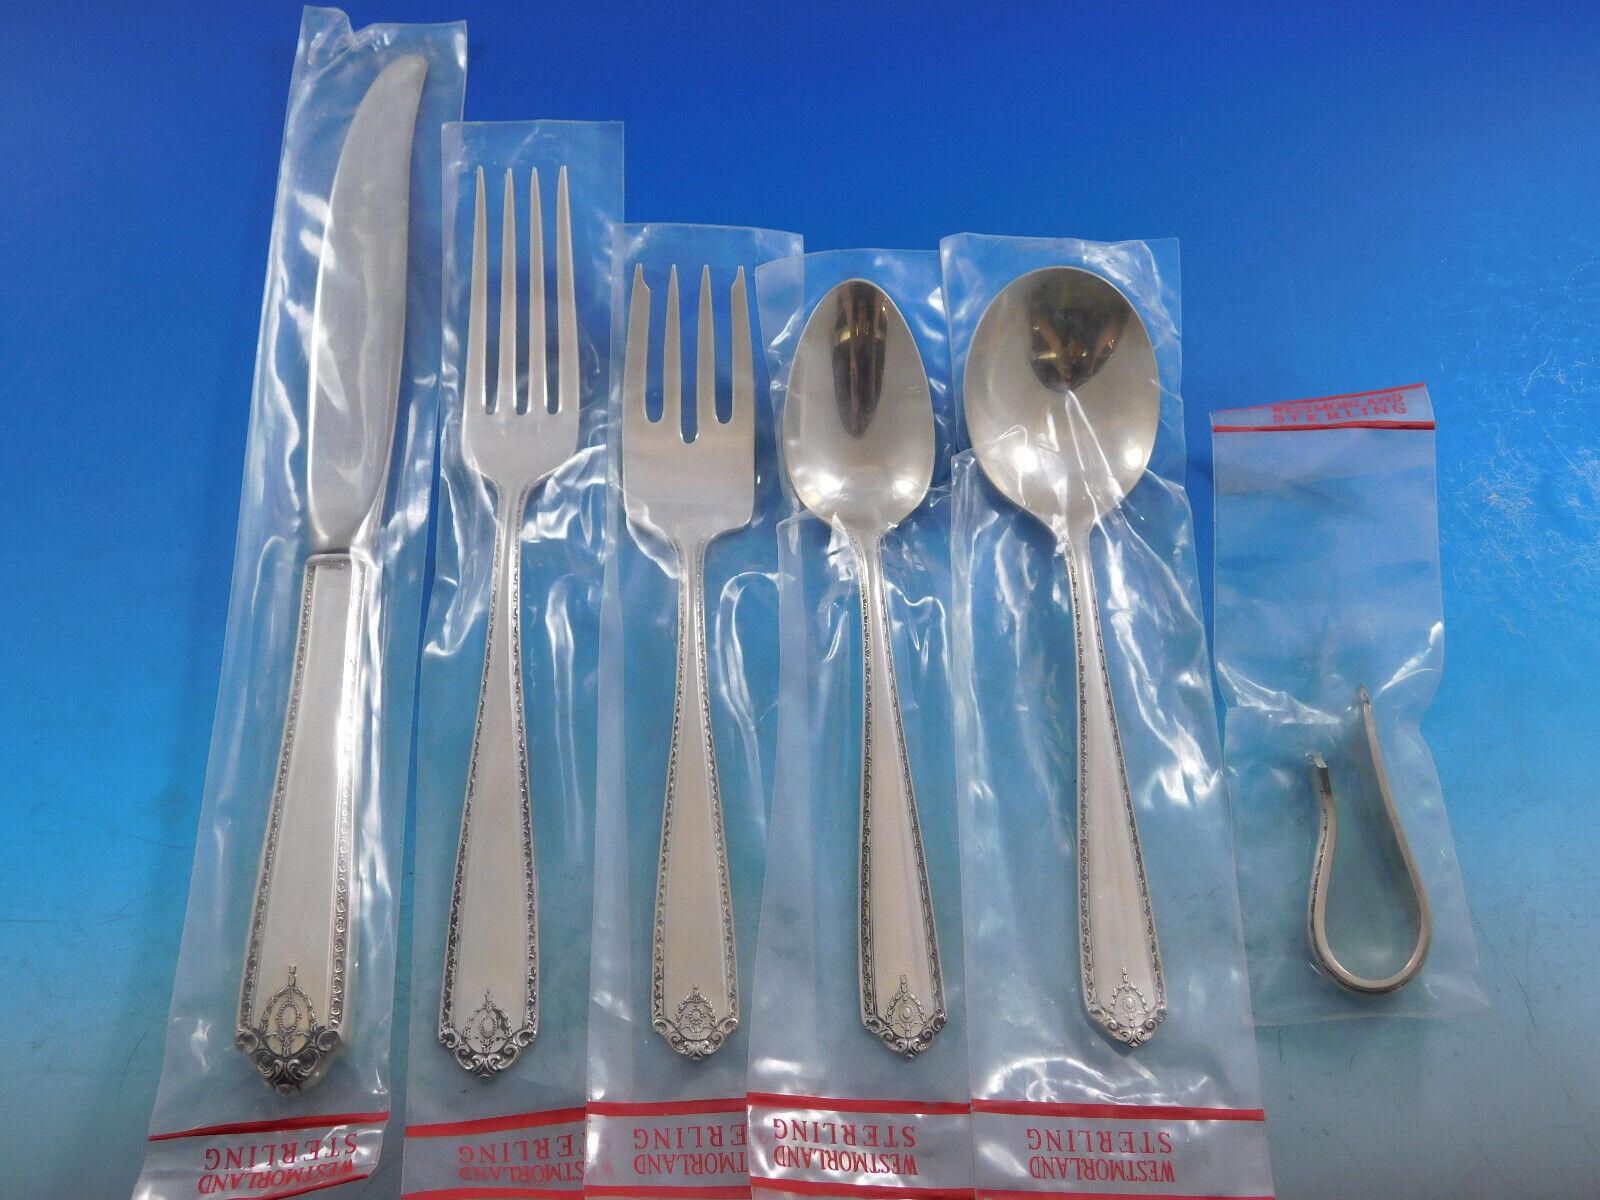 Unused Lady Hilton by Westmorland sterling silver flatware set, 53 pieces. This set includes:

8 Knives w/ modern stainless blades, 9 1/8